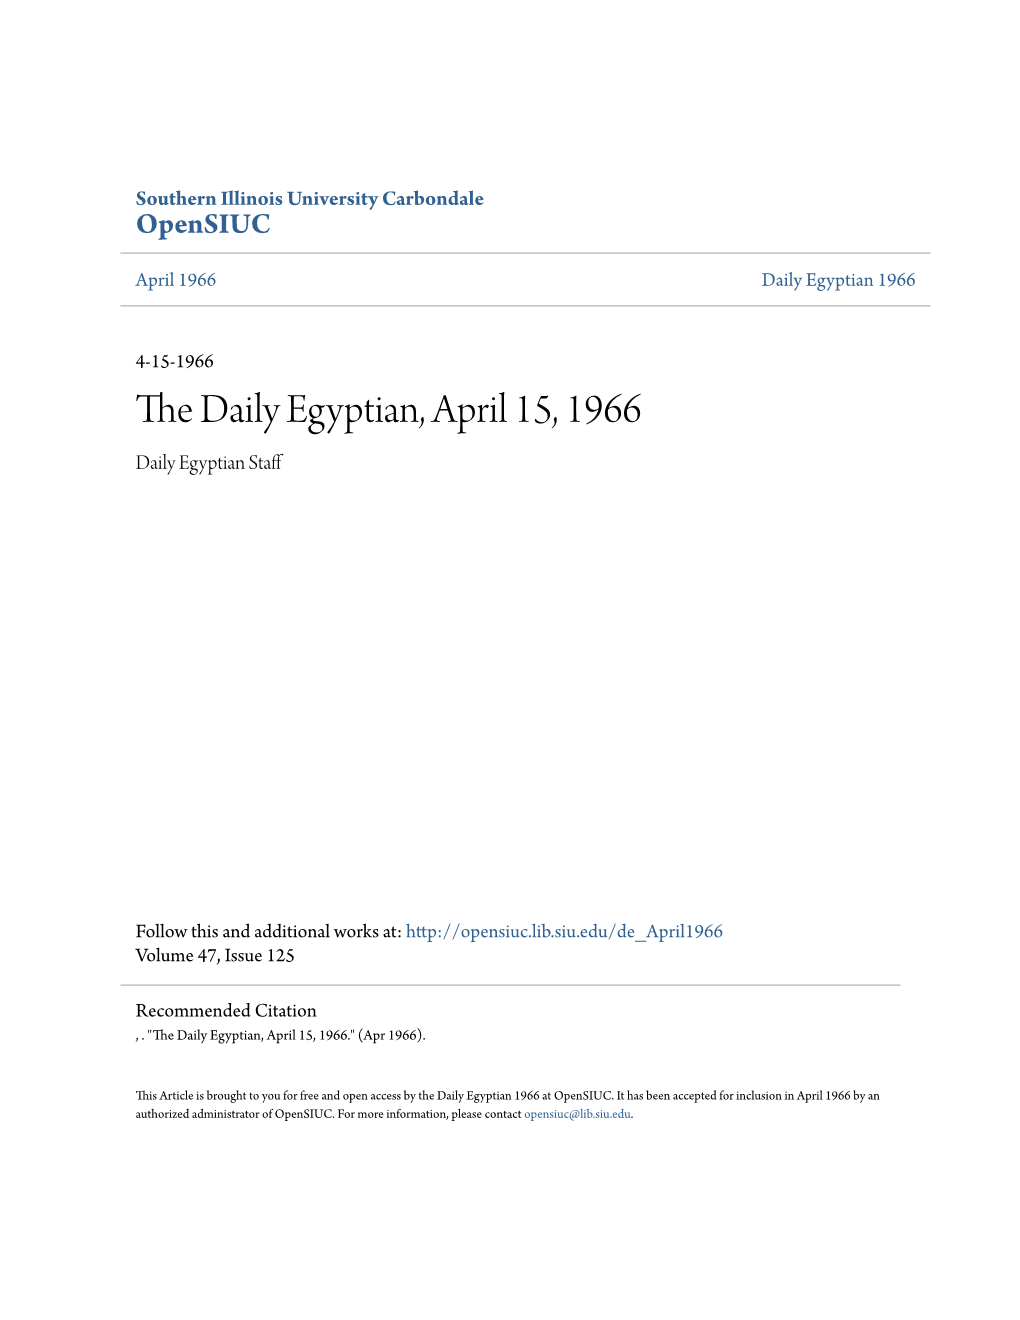 The Daily Egyptian, April 15, 1966